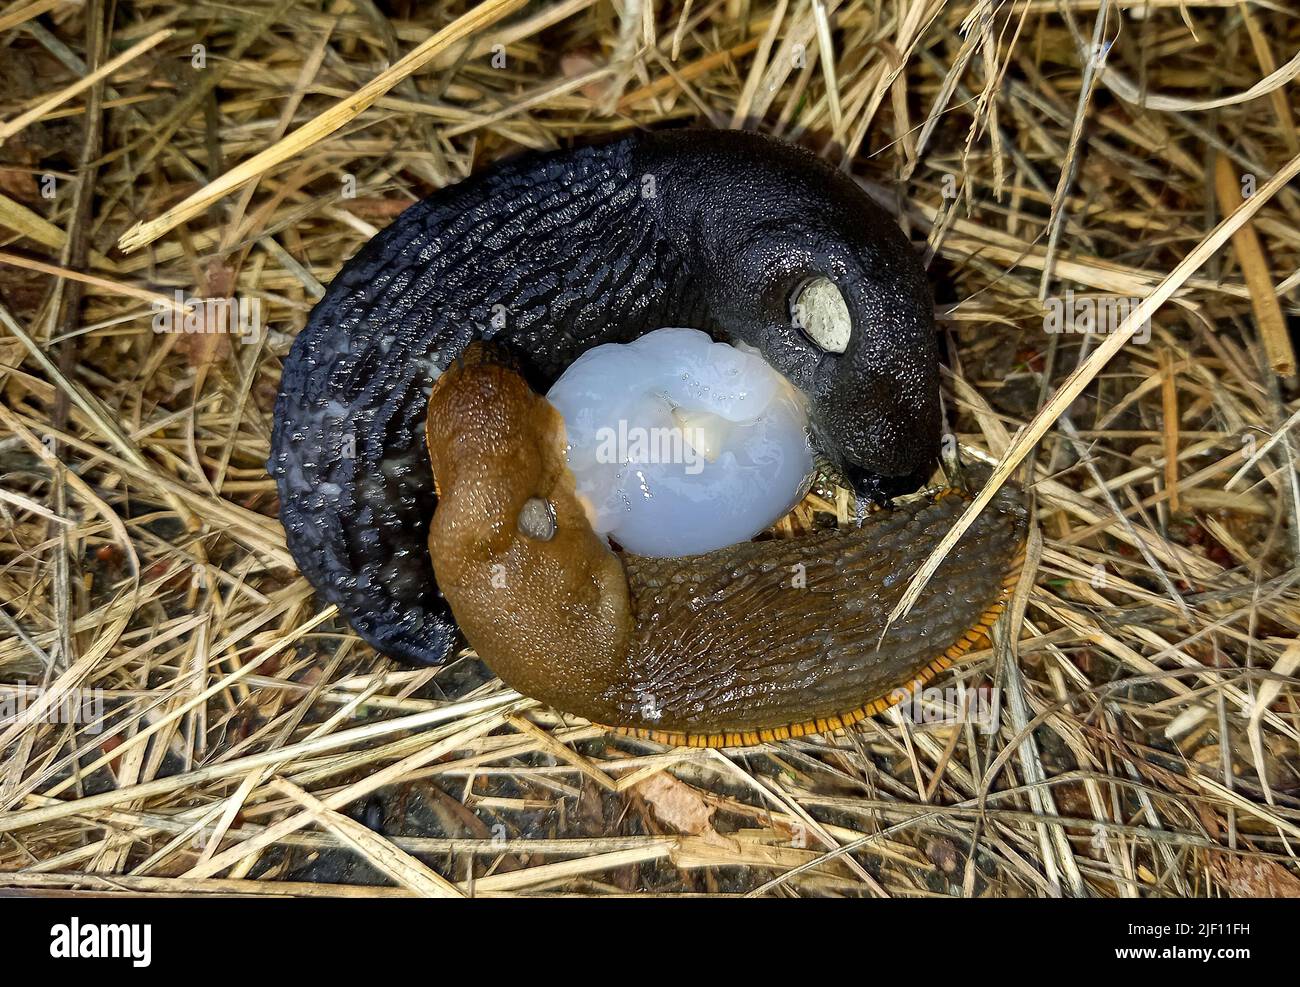 A Portuguese slug (Arion lusitanicus) mate and cross breed with a black slug (Arion ater). The slugs have intertwined, everted penises, carrying out e Stock Photo